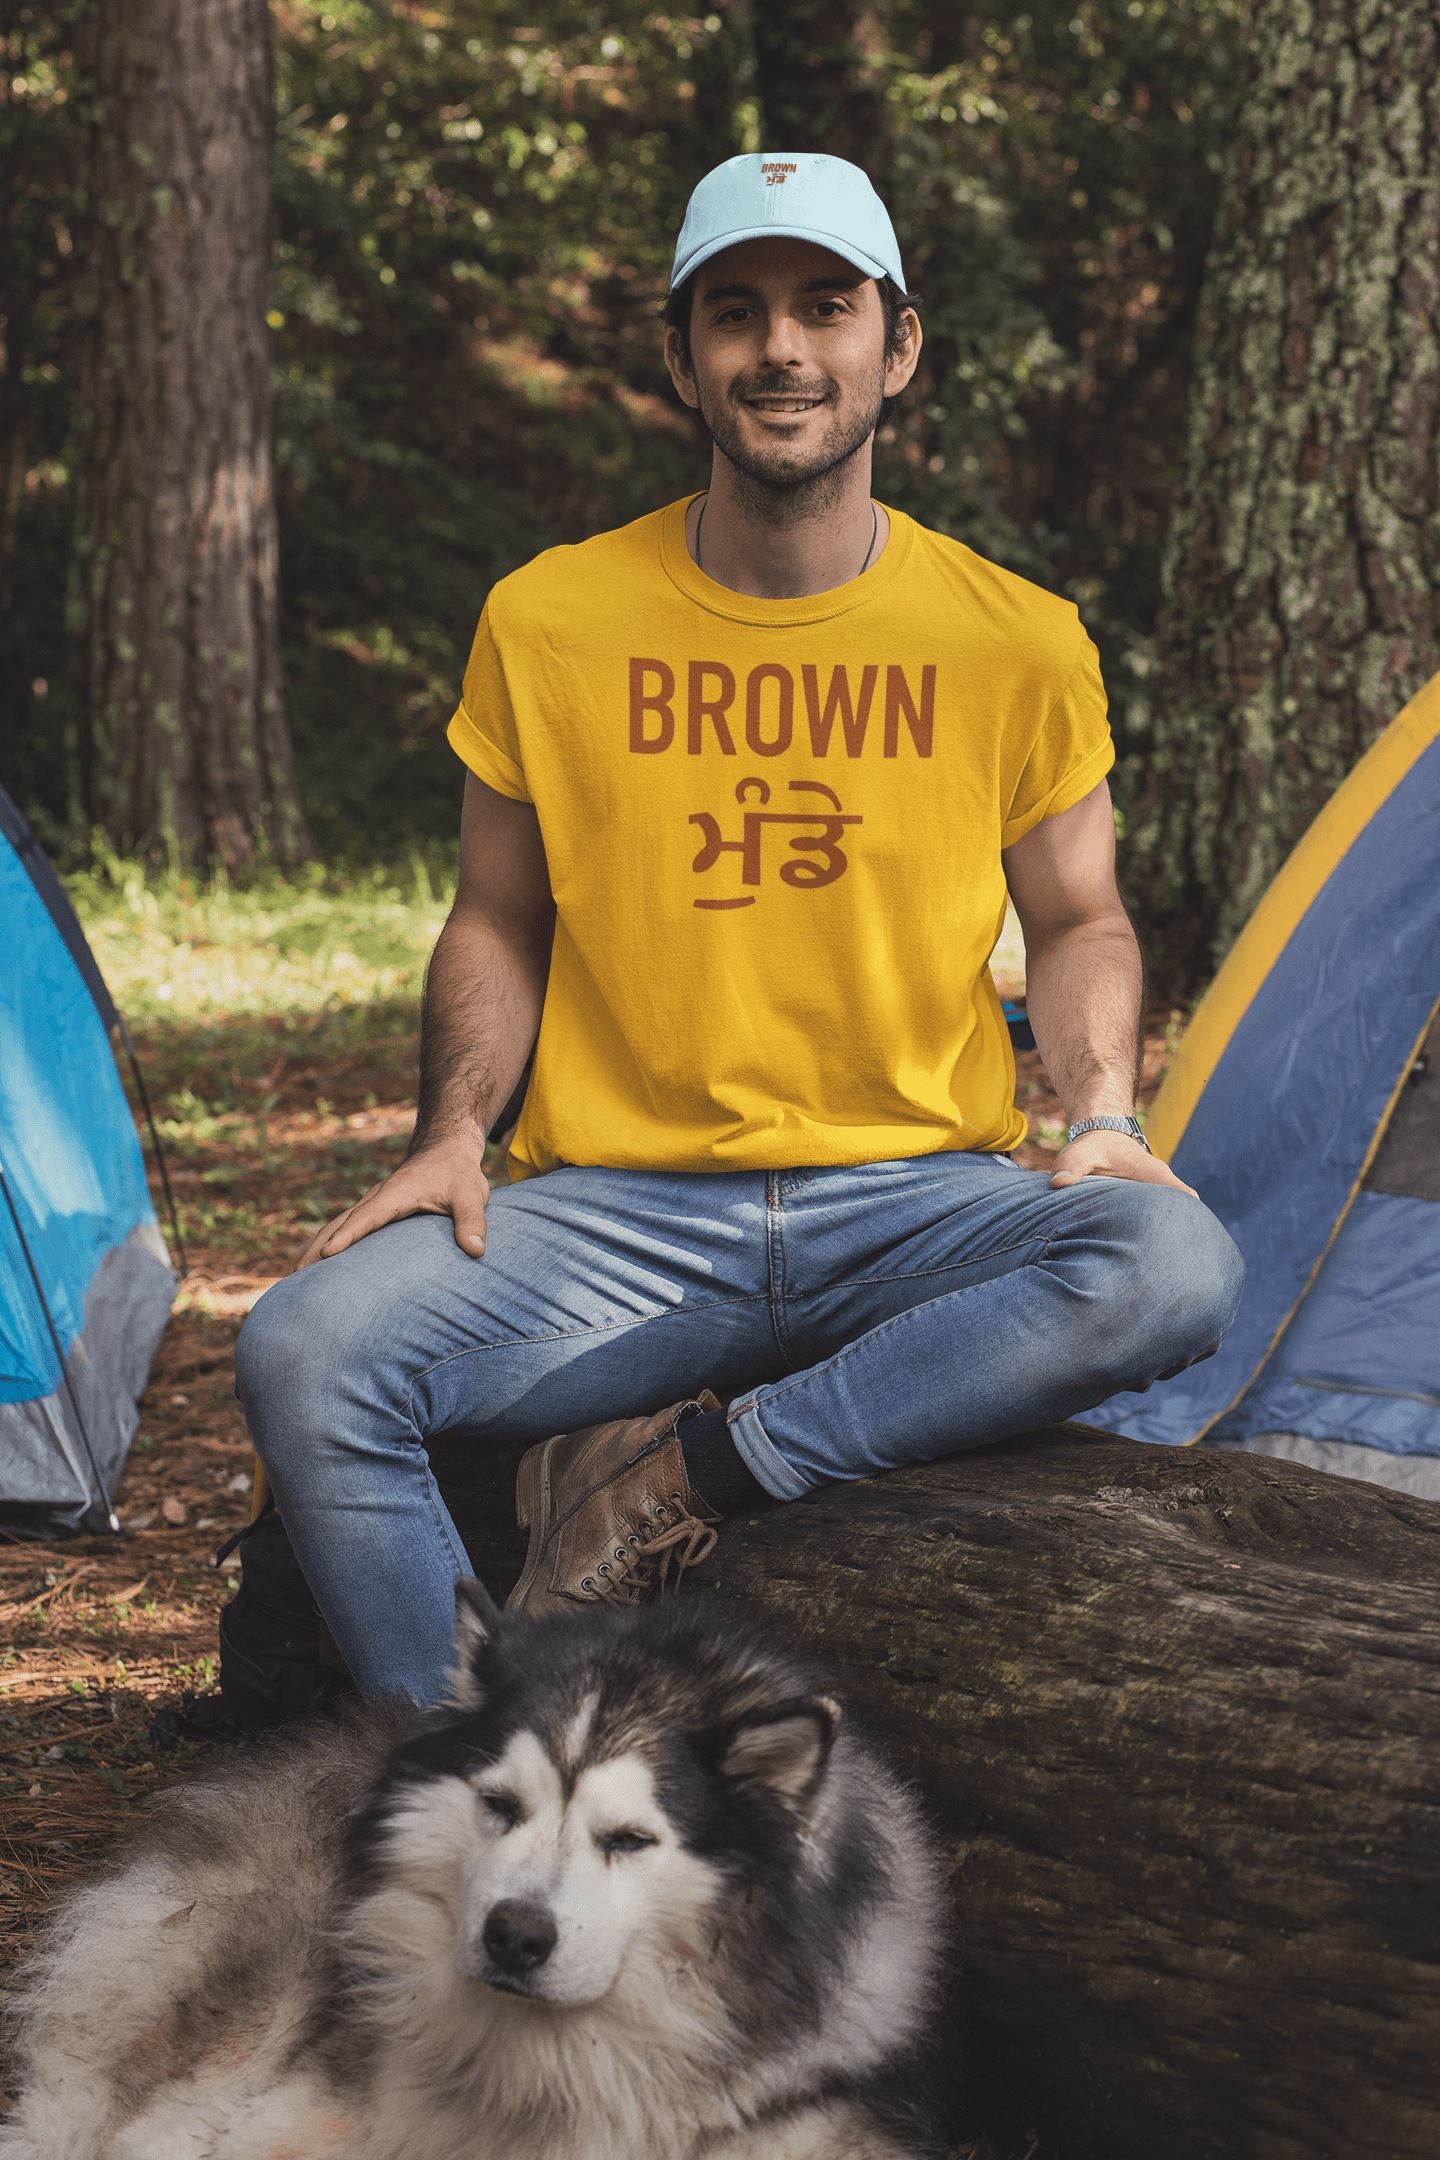 Brown Munde Exclusive T Shirt for Indian Men | Premium Design | Catch My Drift India - Catch My Drift India  brown, clothing, desi, funny, general, gym, indian, made in india, munde, shirt, t